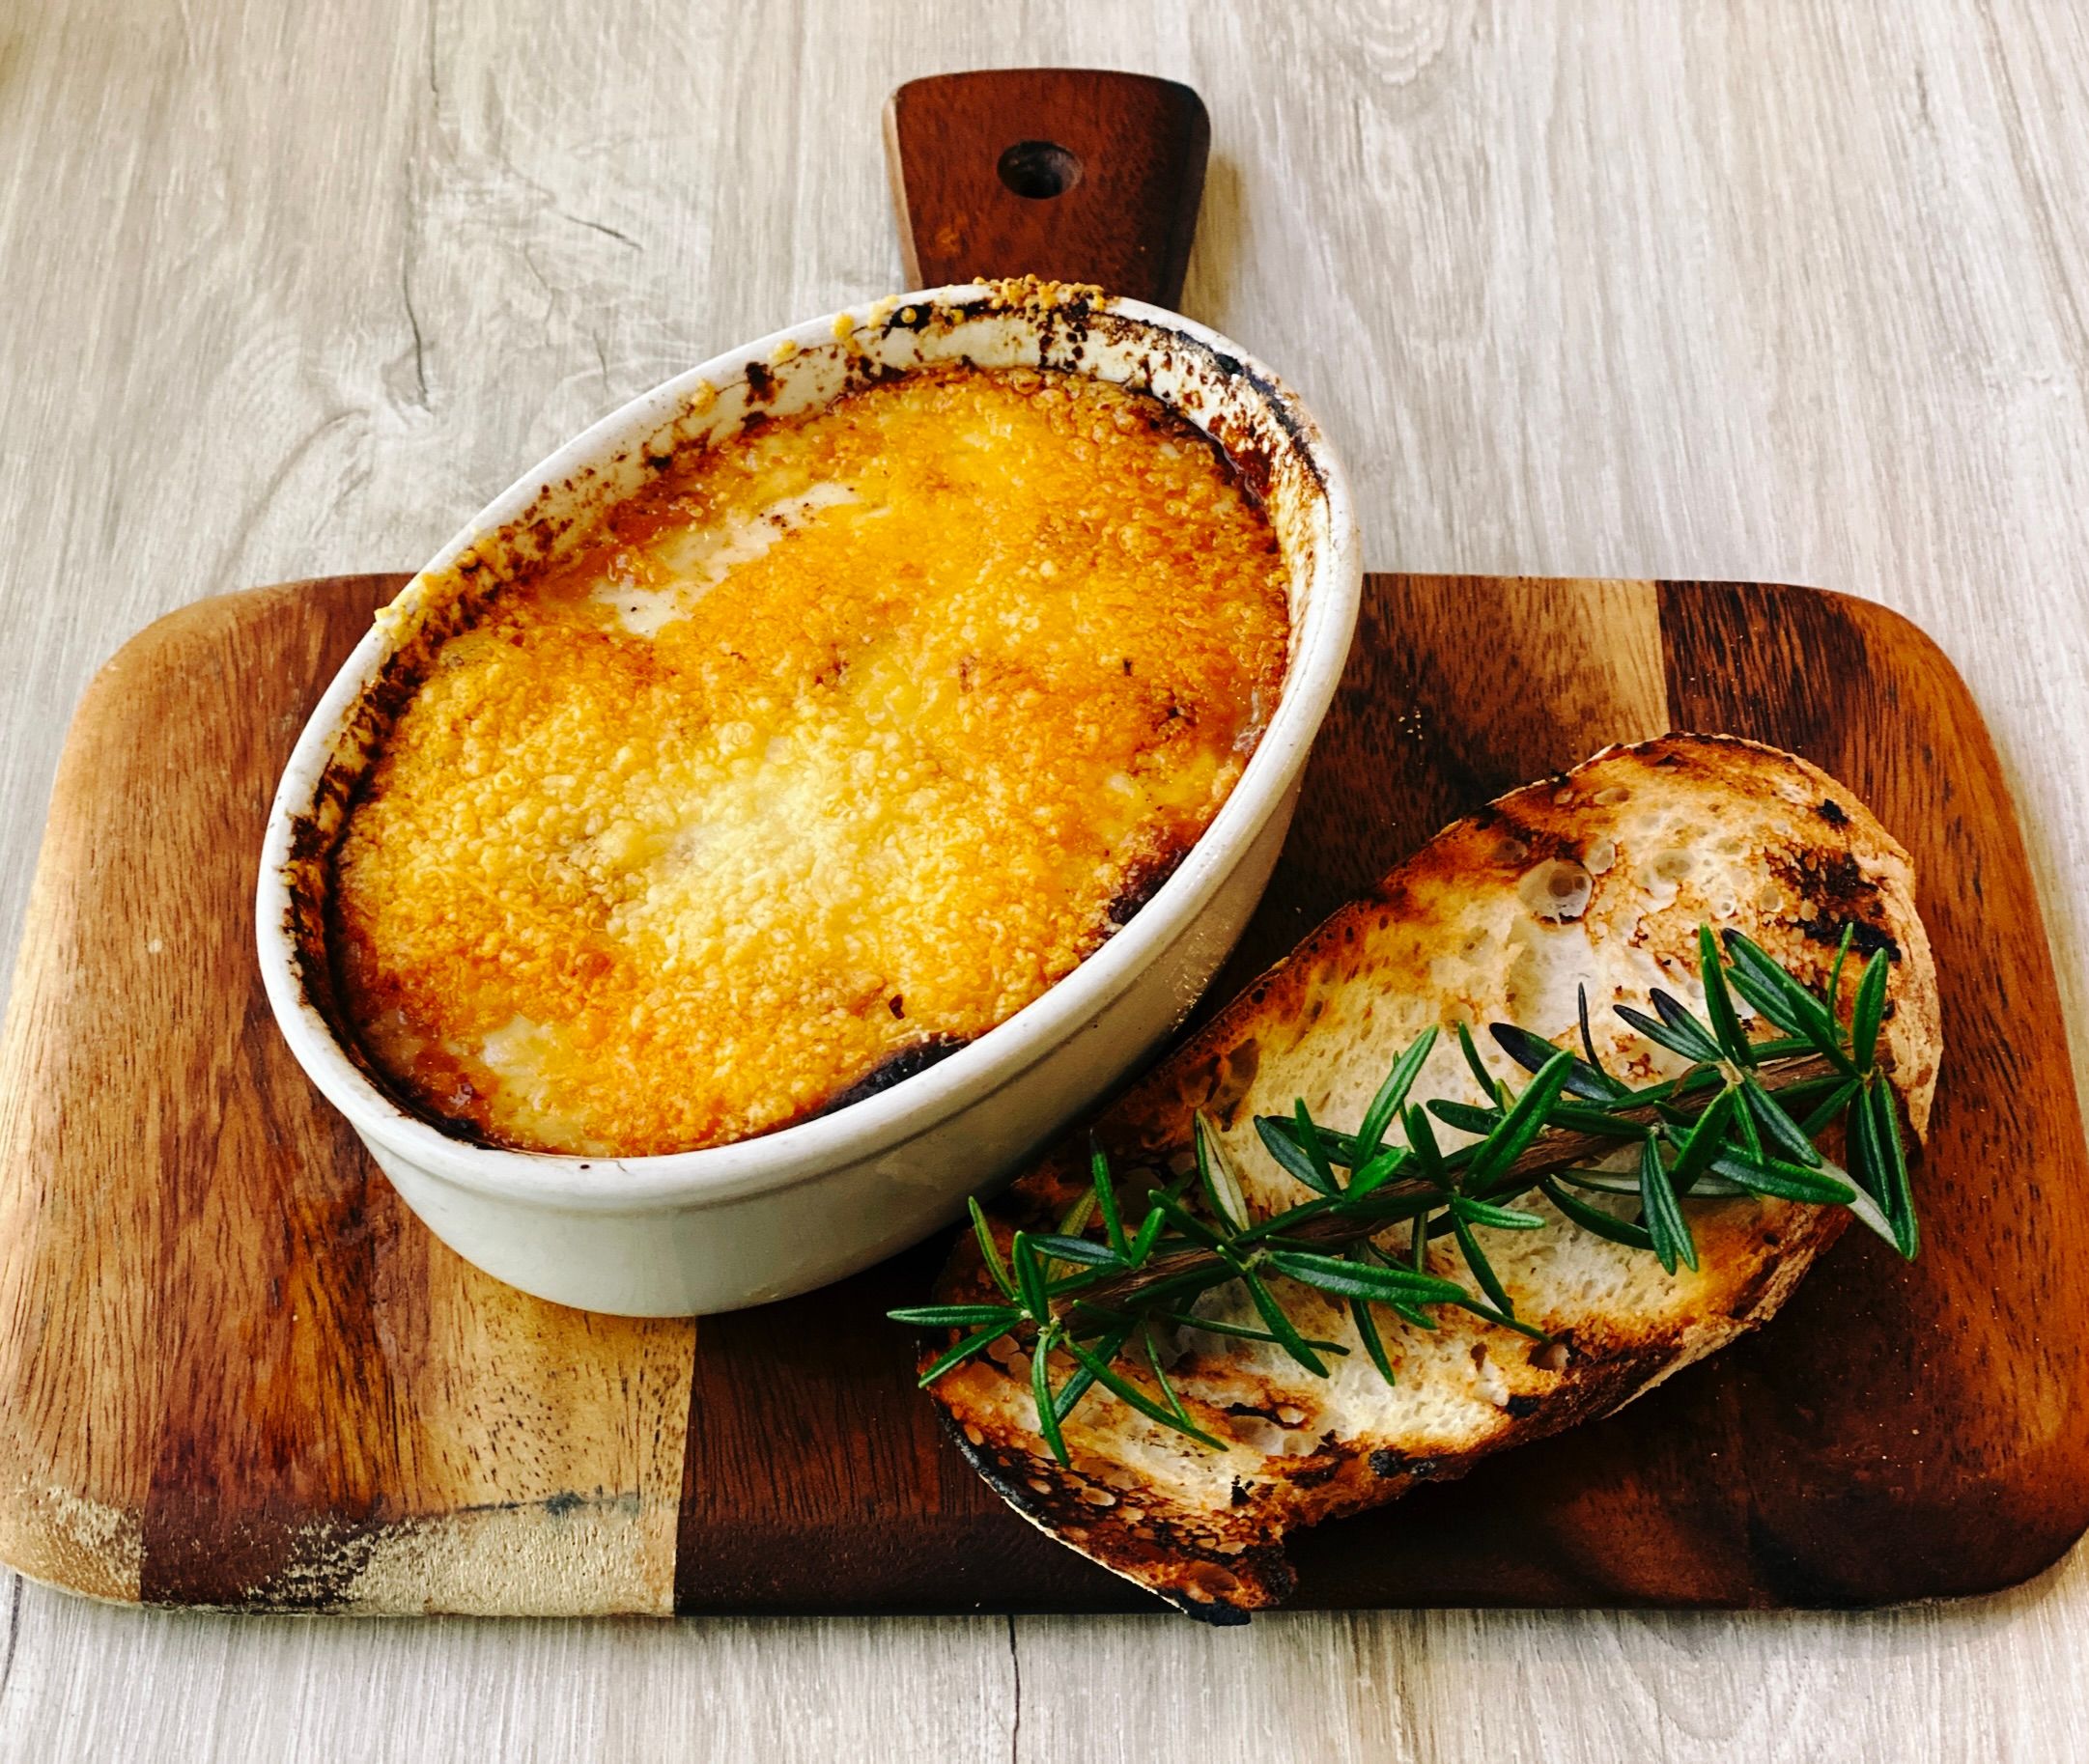 A photo of a deliciously golden brown moussaka in an oval dish alongside a piece of toasted bread.